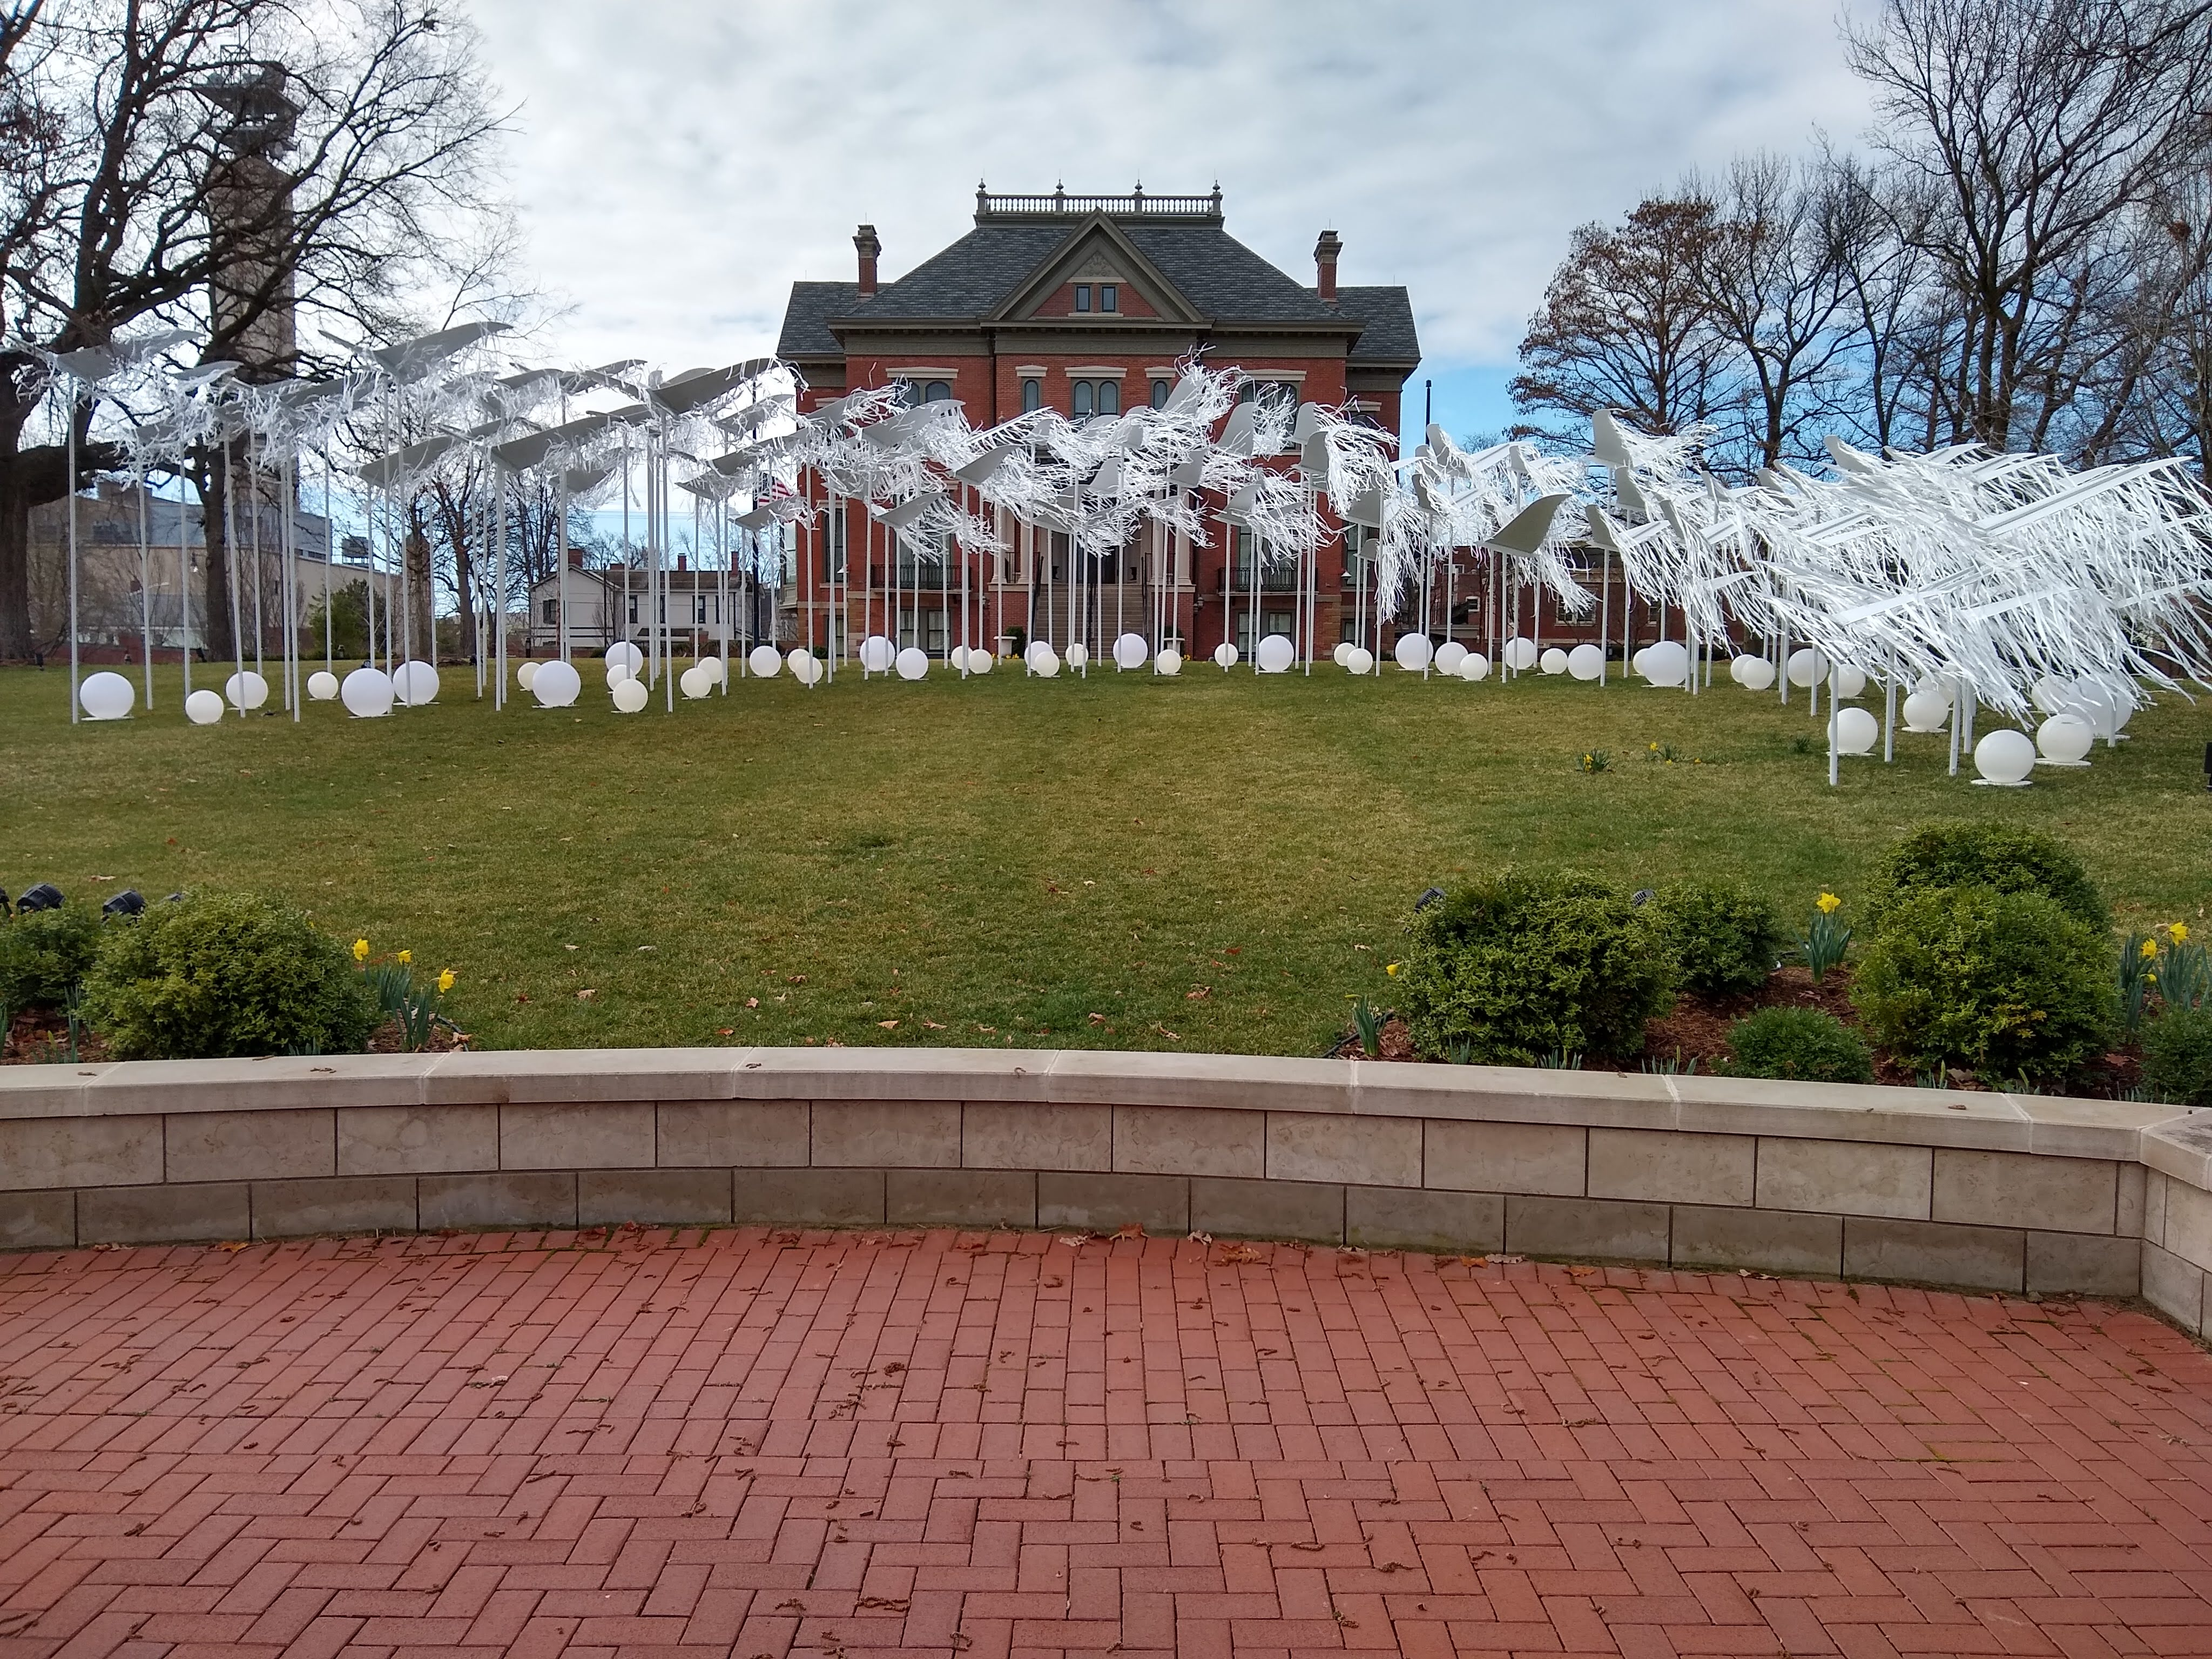 A picture of the Springfield, IL 2021 COVID-19 Memorial. The installation "pay[s] tribute to the more than 23,000 Illinoisans who died from COVID-19 across our 102 counties, as represented by 102 sets of wings. Together, the wings hold up over 5,500 ribbons, each representing 4 Illinoisans who lost their fight with this virus".